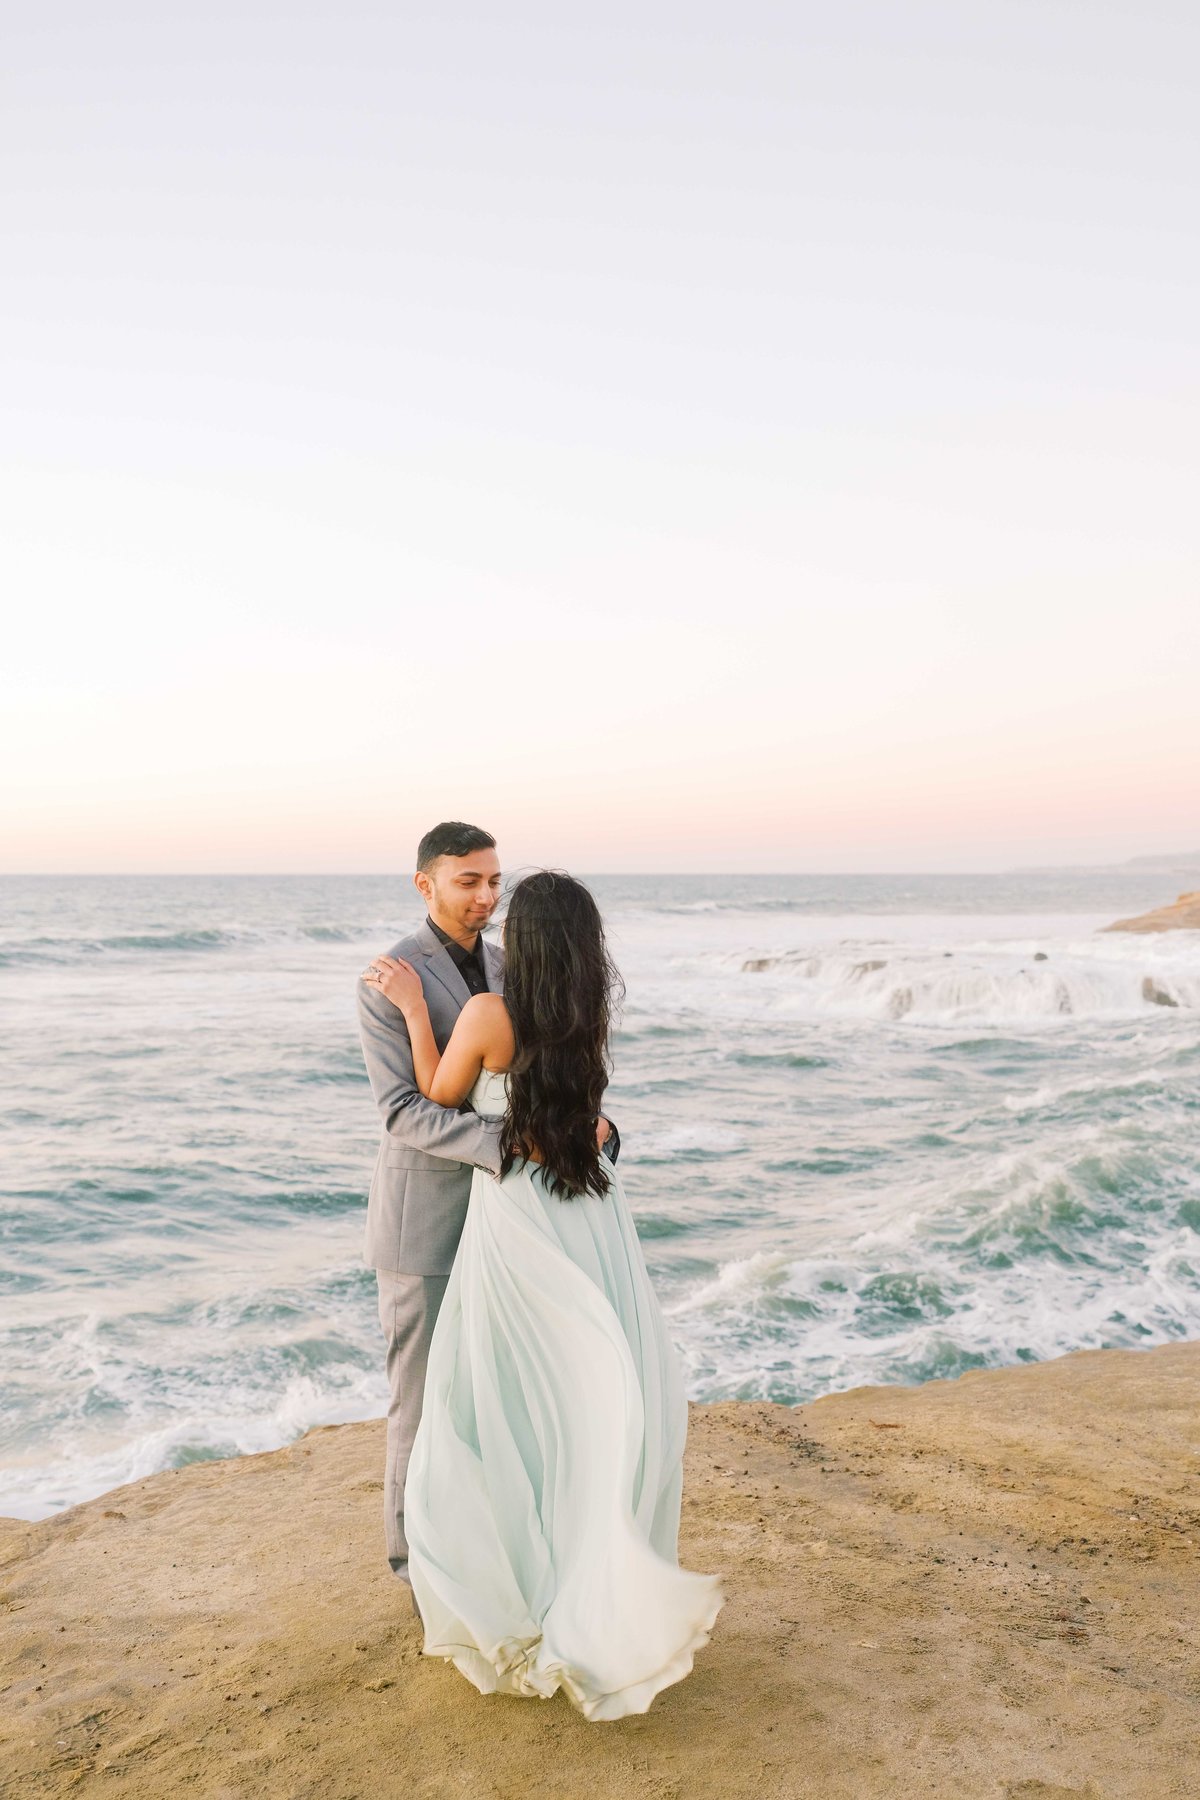 Babsie-Ly-Photography-San-Diego-Proposal-Engagement-Sunset-Cliffs-Indian-Couple-Dog-Surprise-006